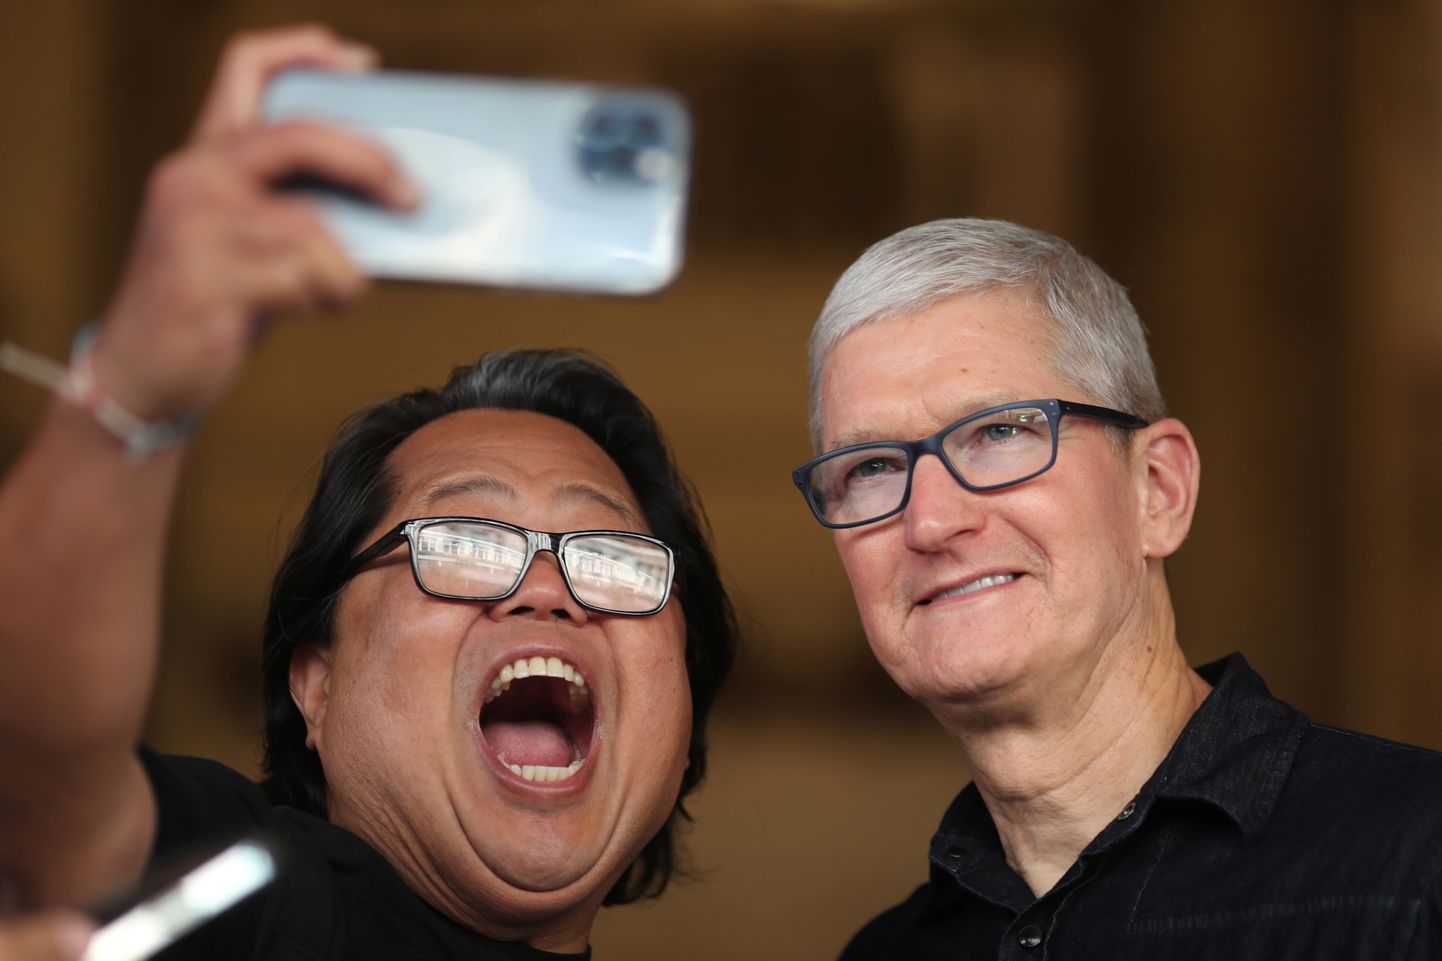 Apple CEO Tim Cook poses for a selfie with a visitor at the new Apple Store on Broadway in downtown Los Angeles, California, U.S., June 24, 2021. REUTERS/Lucy Nicholson